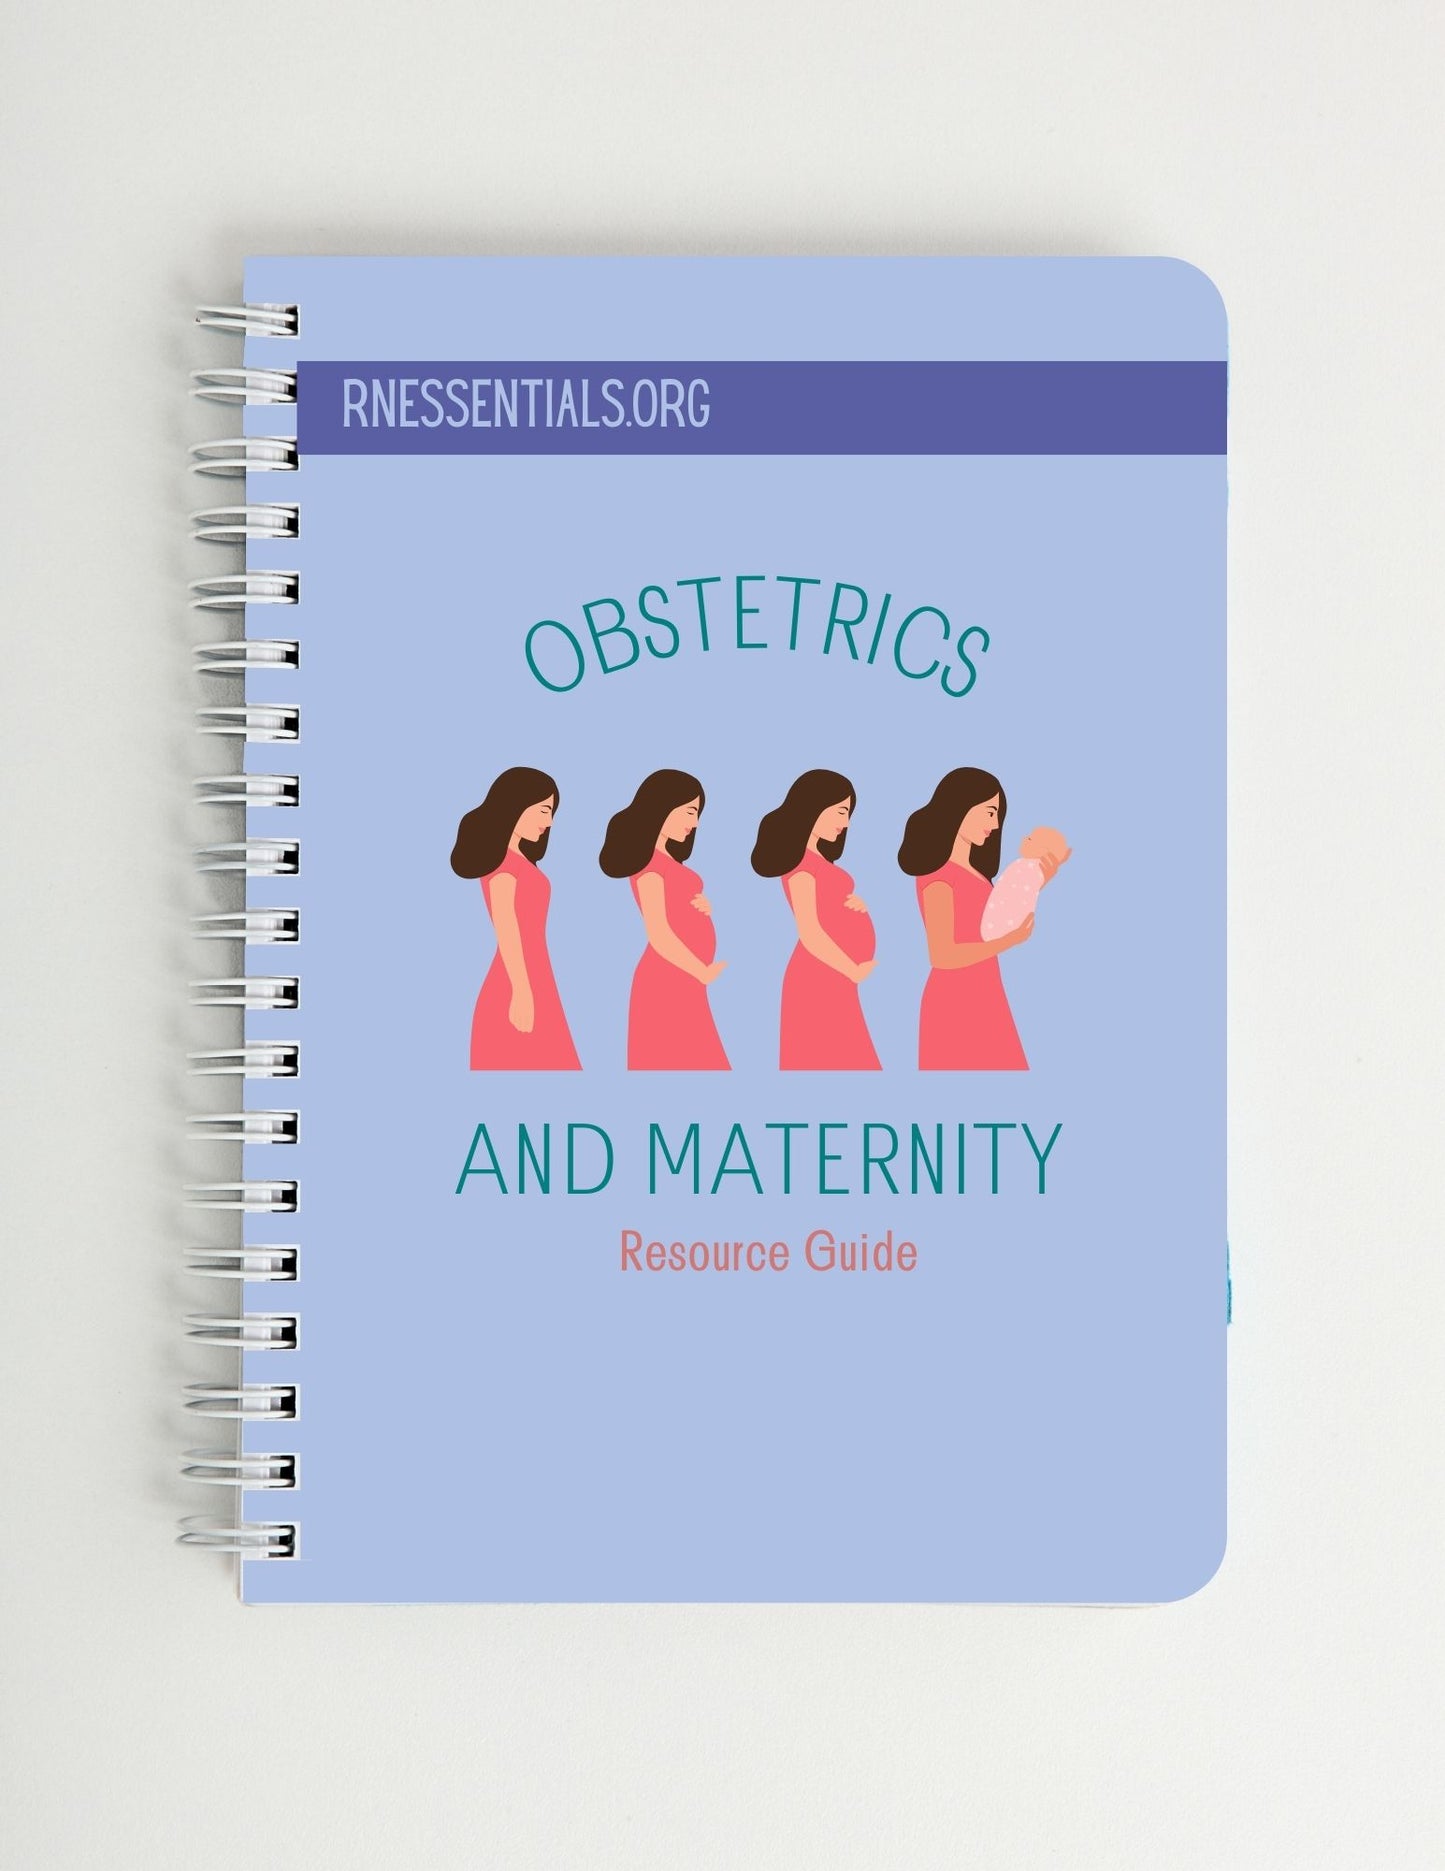 Obstetrics and Maternity: Resource Guide